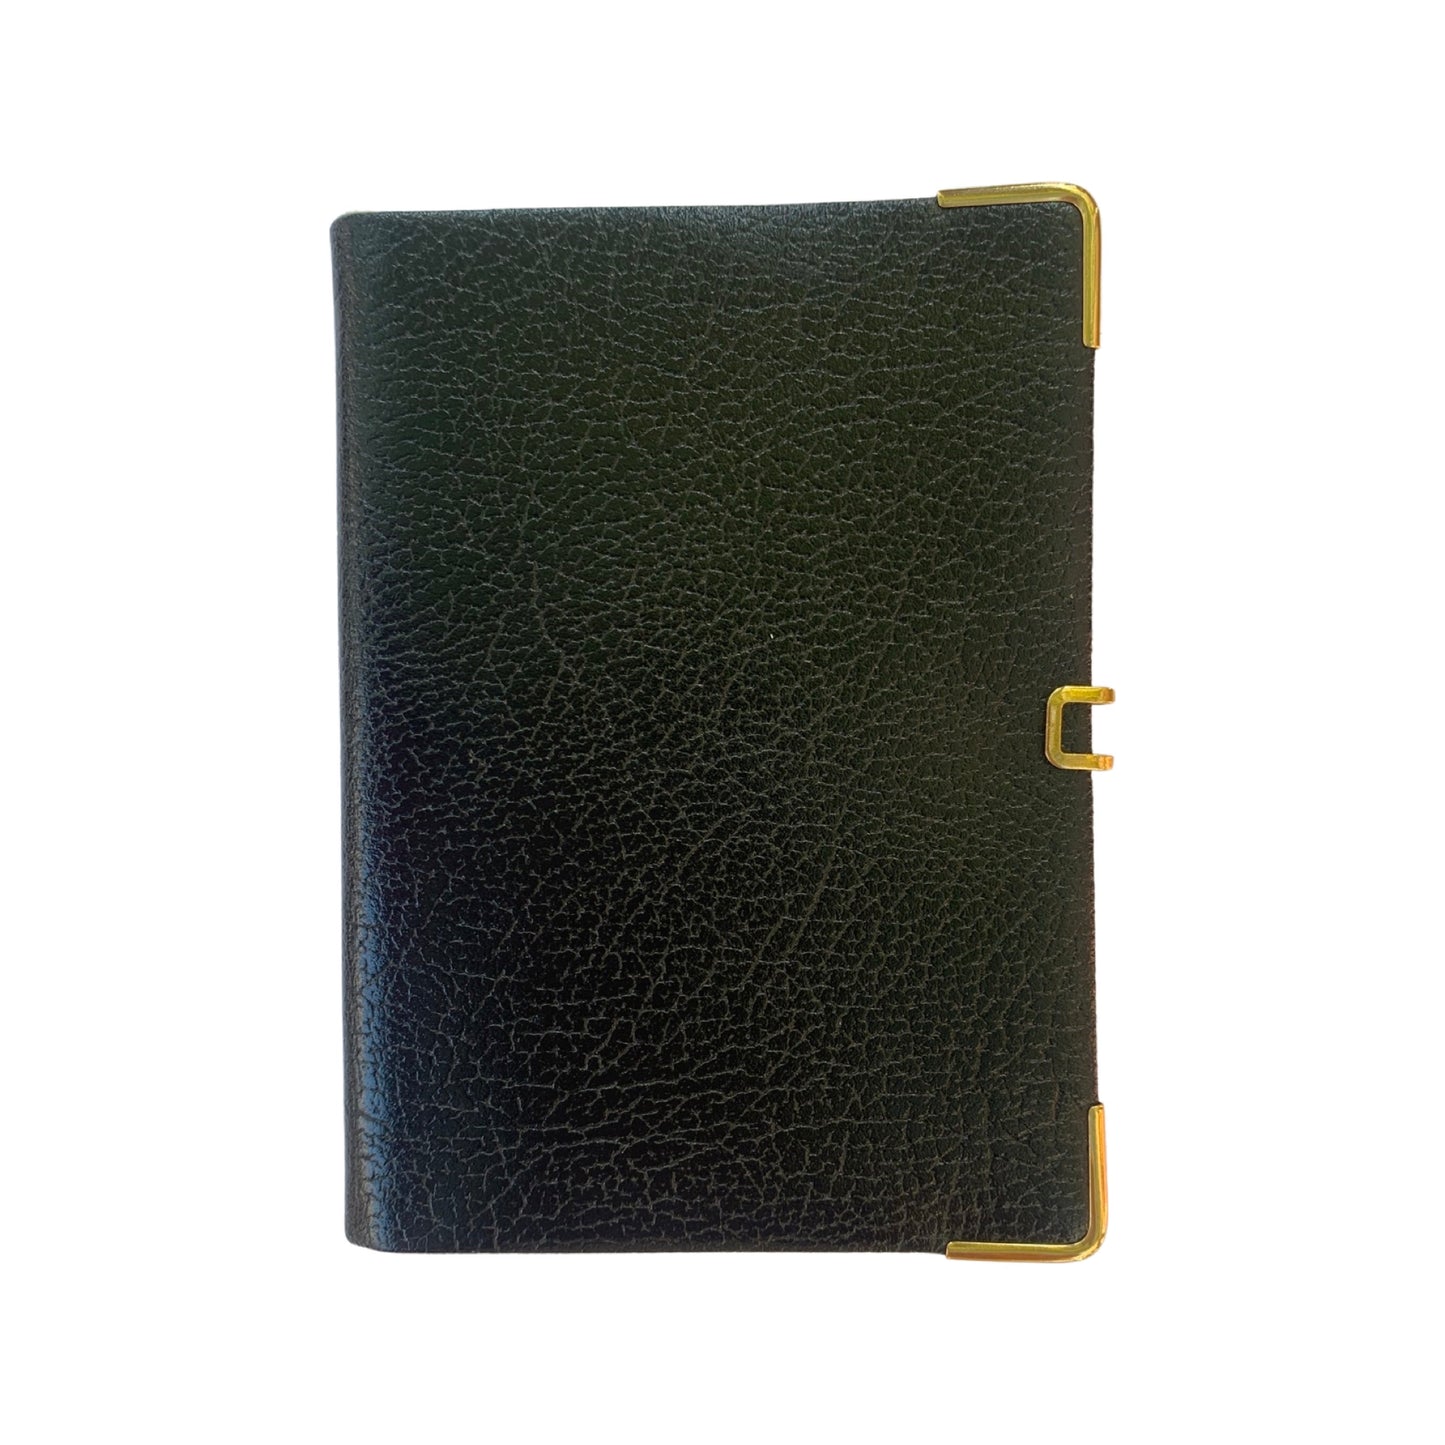 Address Book | Leather Pocket Address Book | 4 by 2.5 inches | Embossed Buffalo Calf | Pencil, Clip, and Gold Corners | Charing Cross | No. A42CAJC